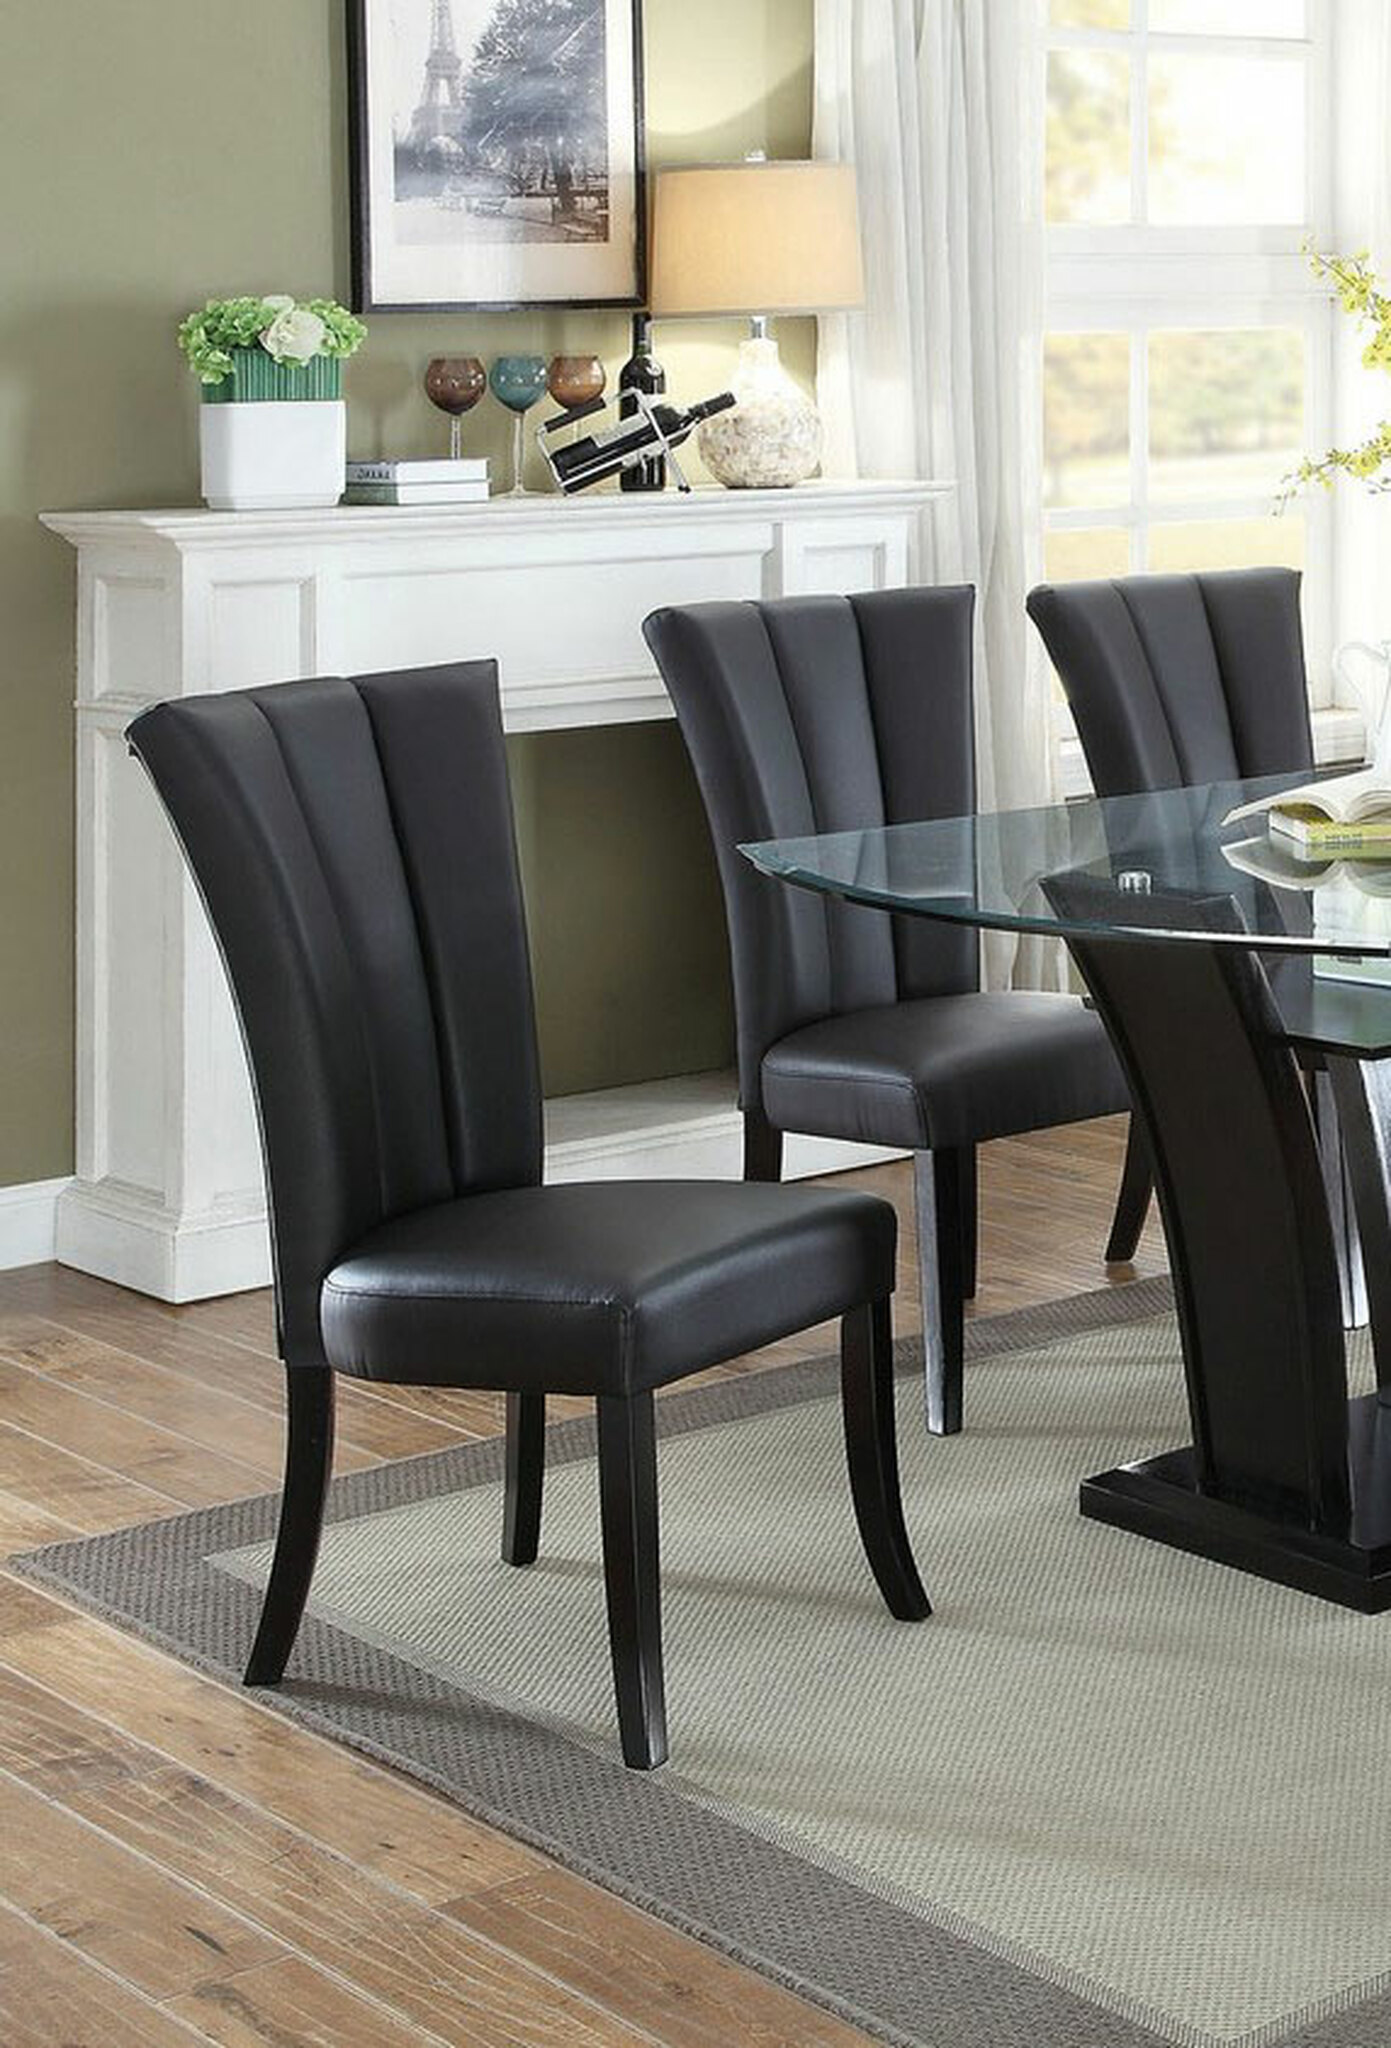 Black Faux Leather Upholstered Lines back Set of 2 Chairs Dining Room-Boyel Living